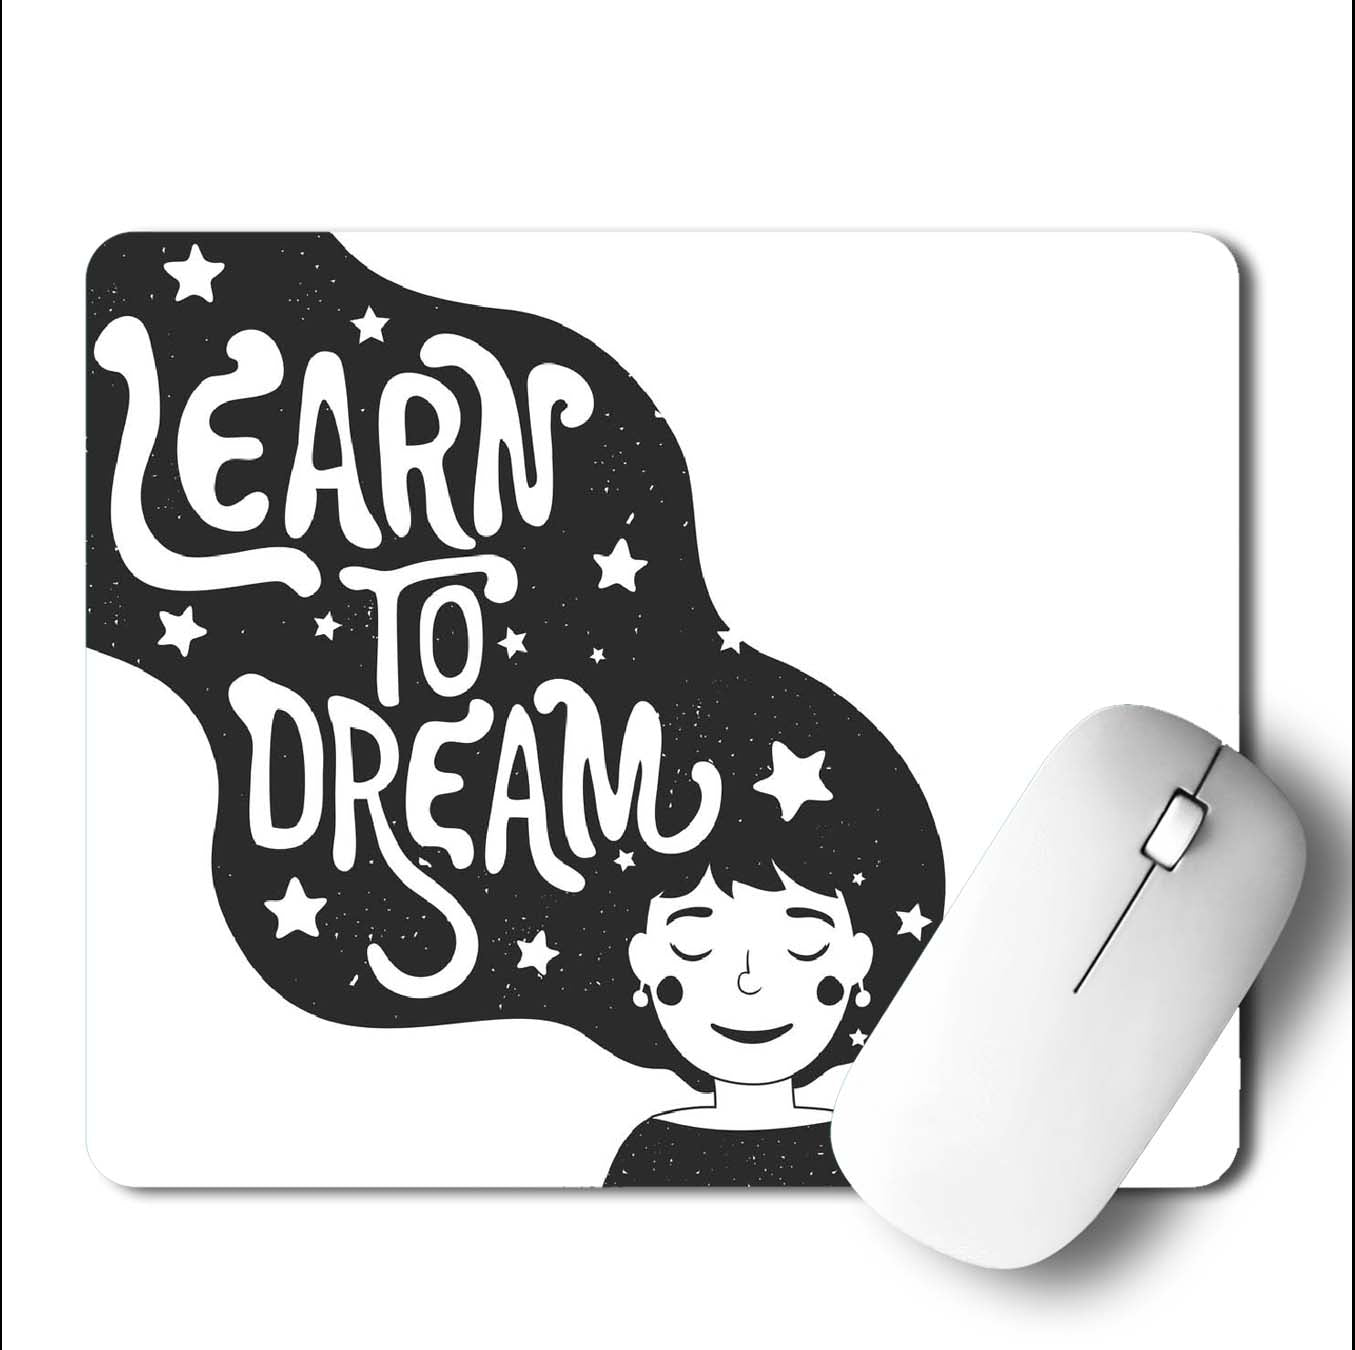 Learn To Dream Mouse Pad